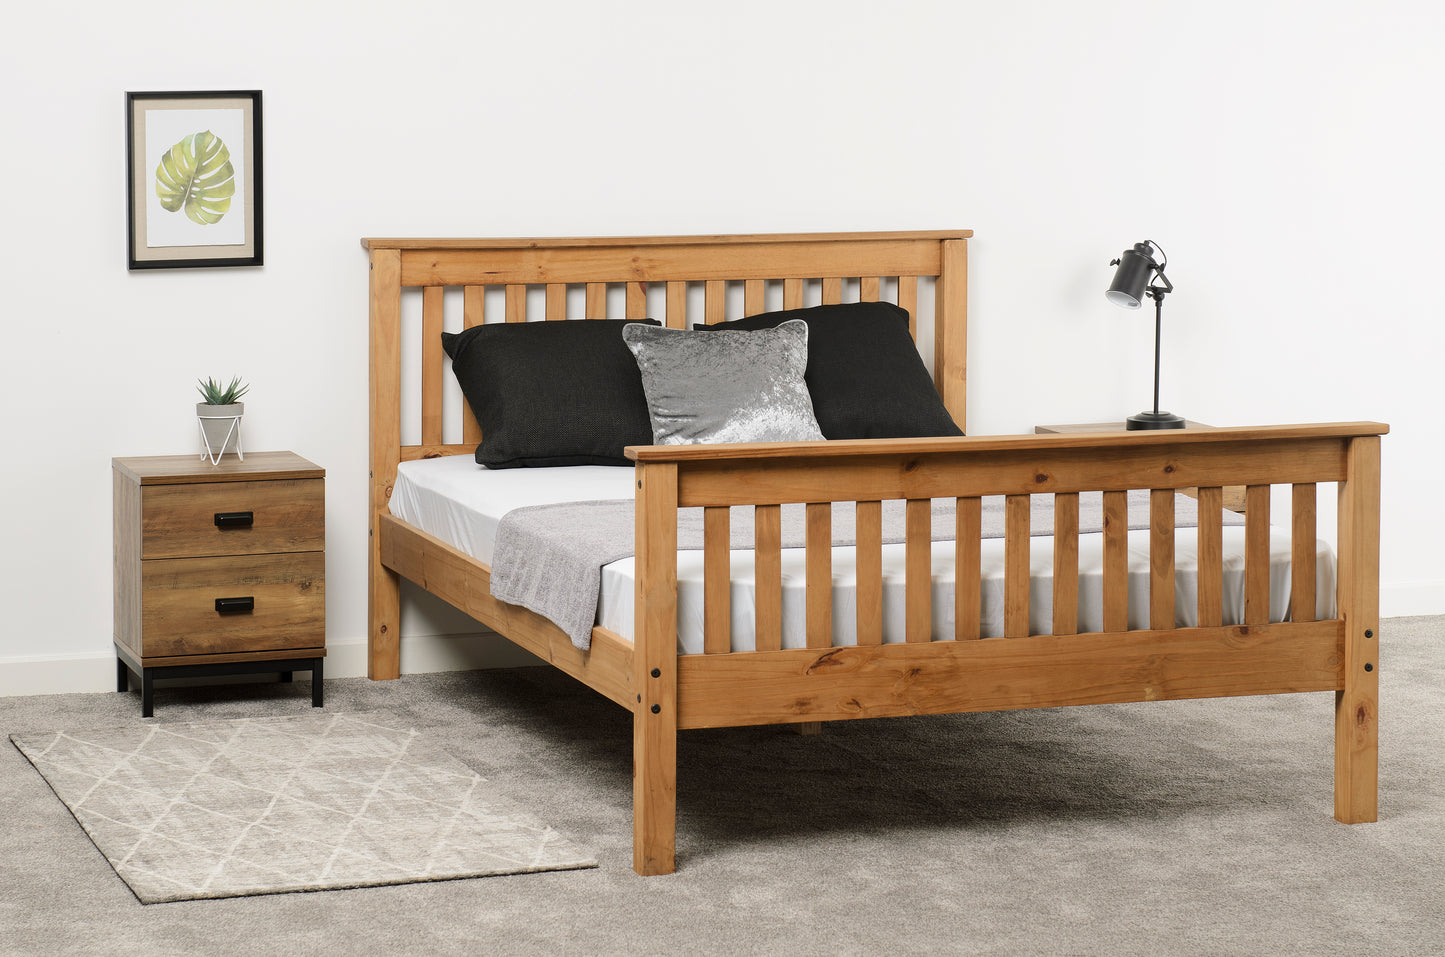 MONACO 4'6" BED HIGH FOOT END - DISTRESSED WAXED PINE